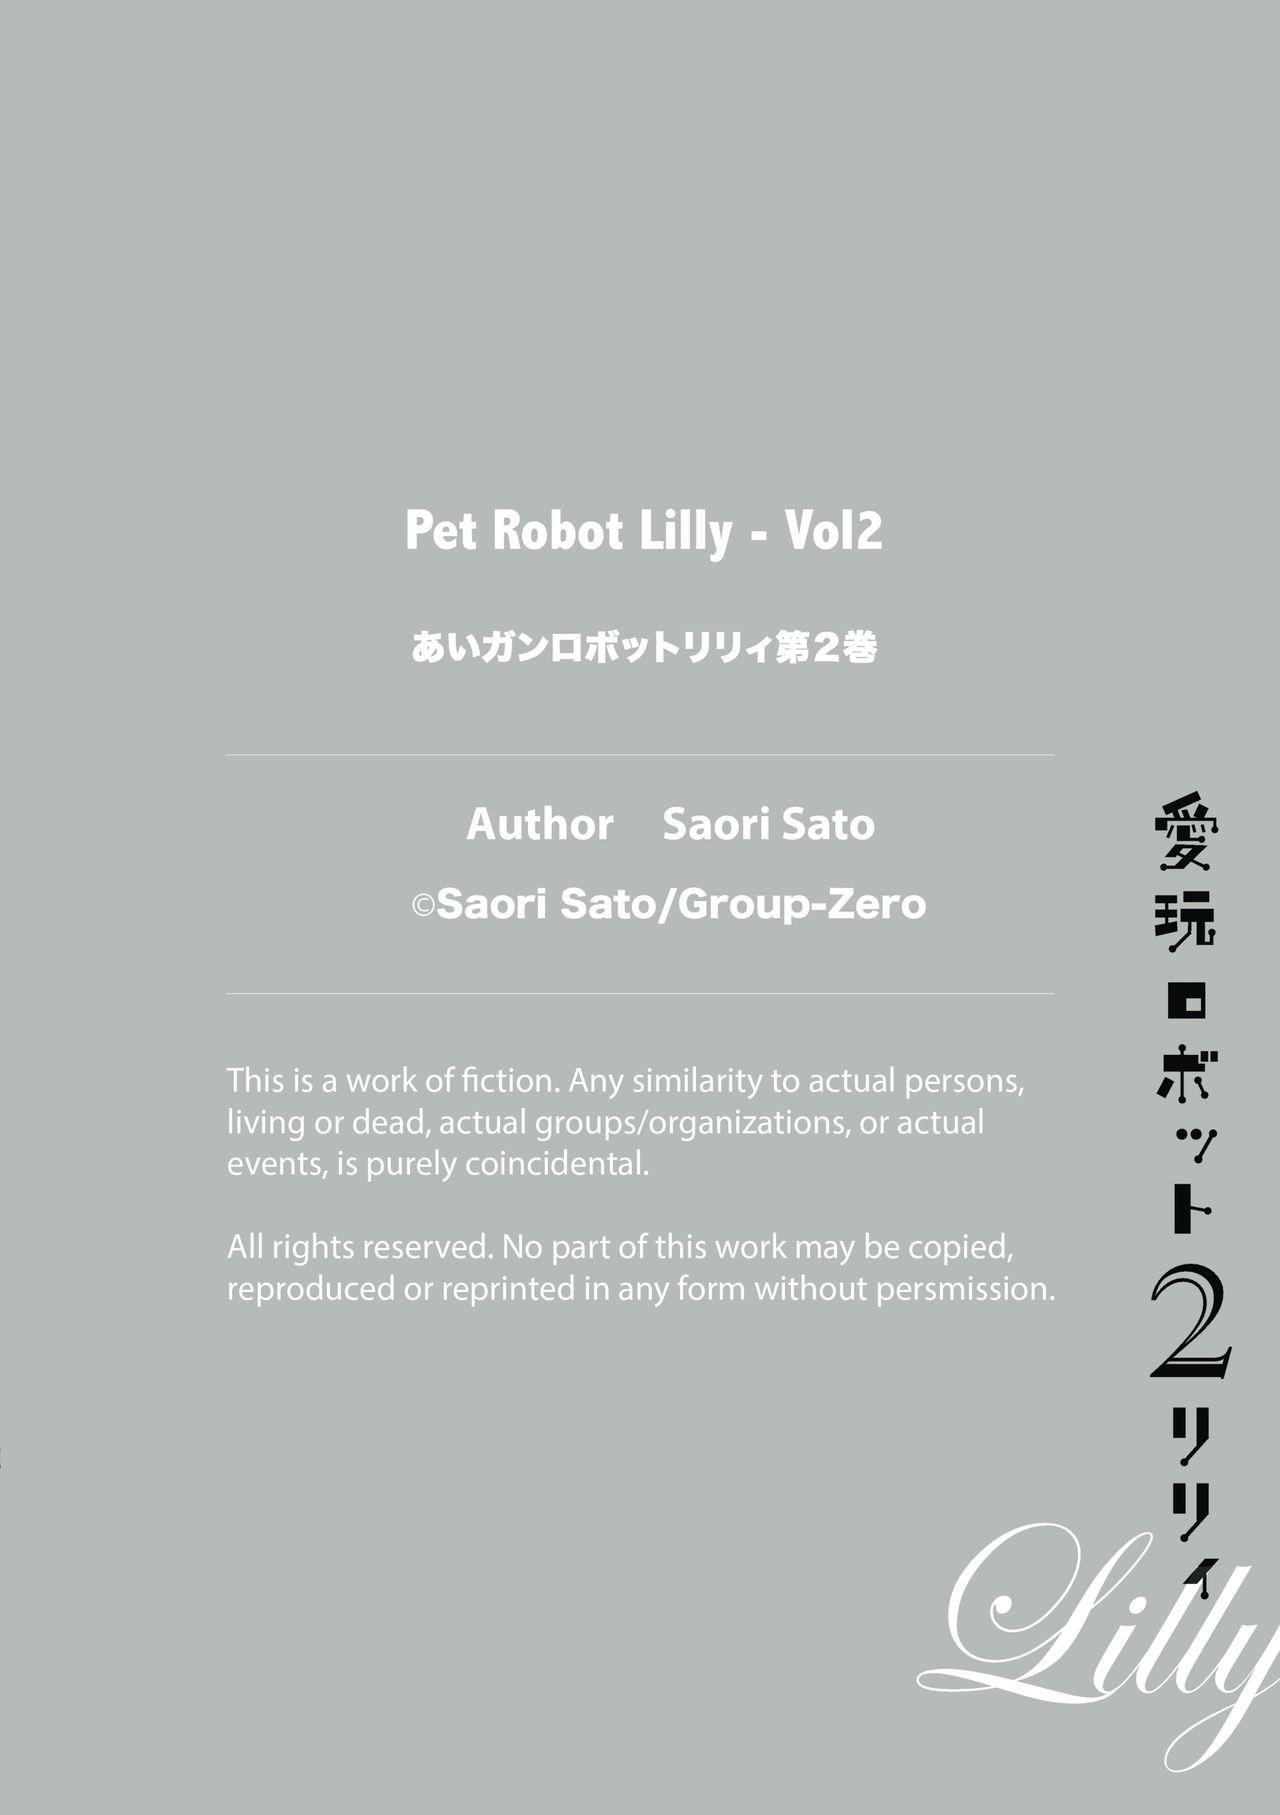 Rough Fuck Aigan Robot Lilly - Pet Robot Lilly Vol. 2 Hymen - Page 152